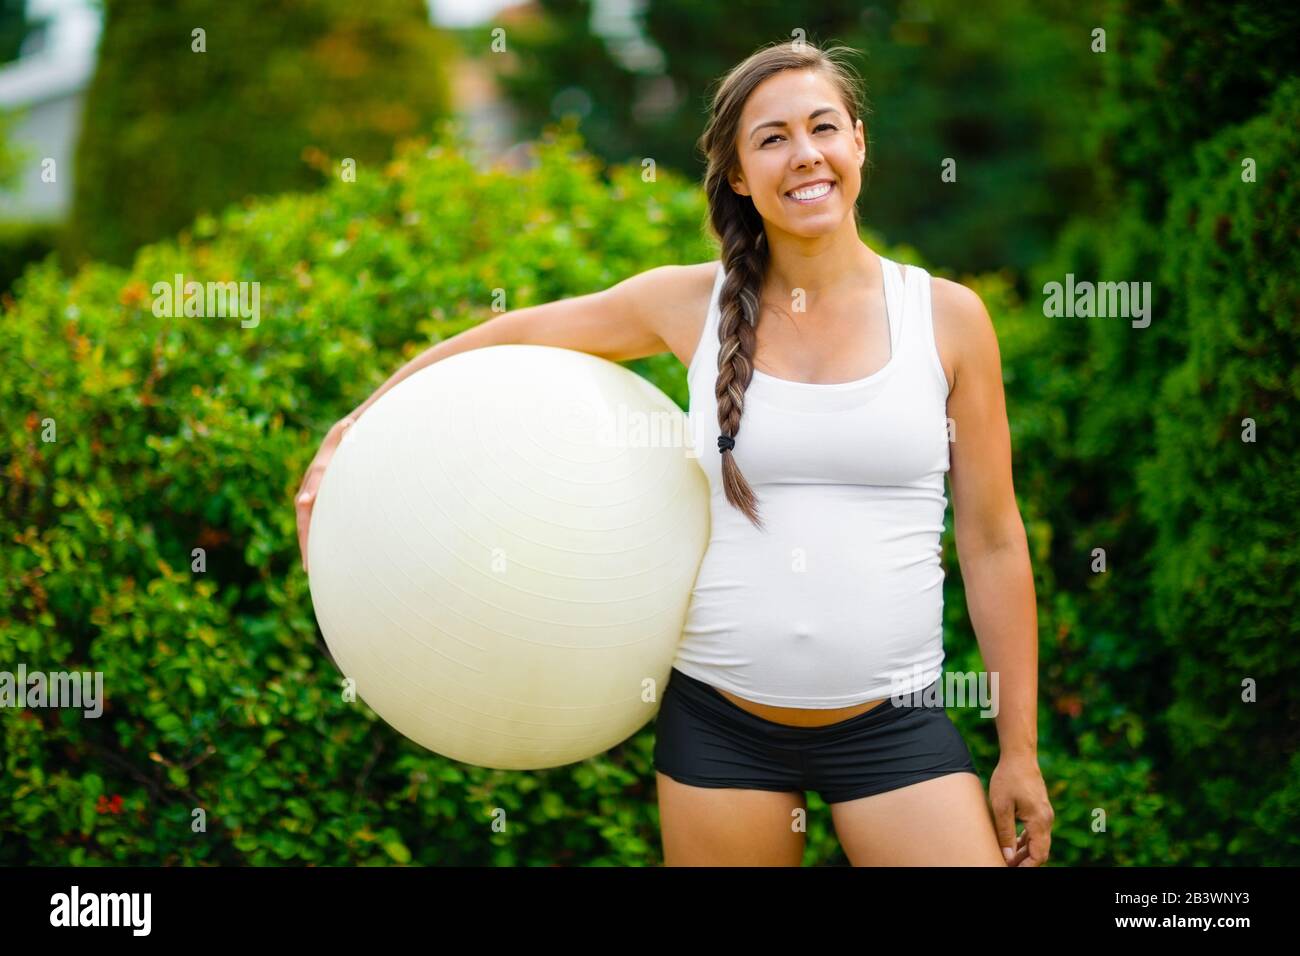 Smiling Young Expectant Mother Holding Exercise Ball In Park Stock Photo